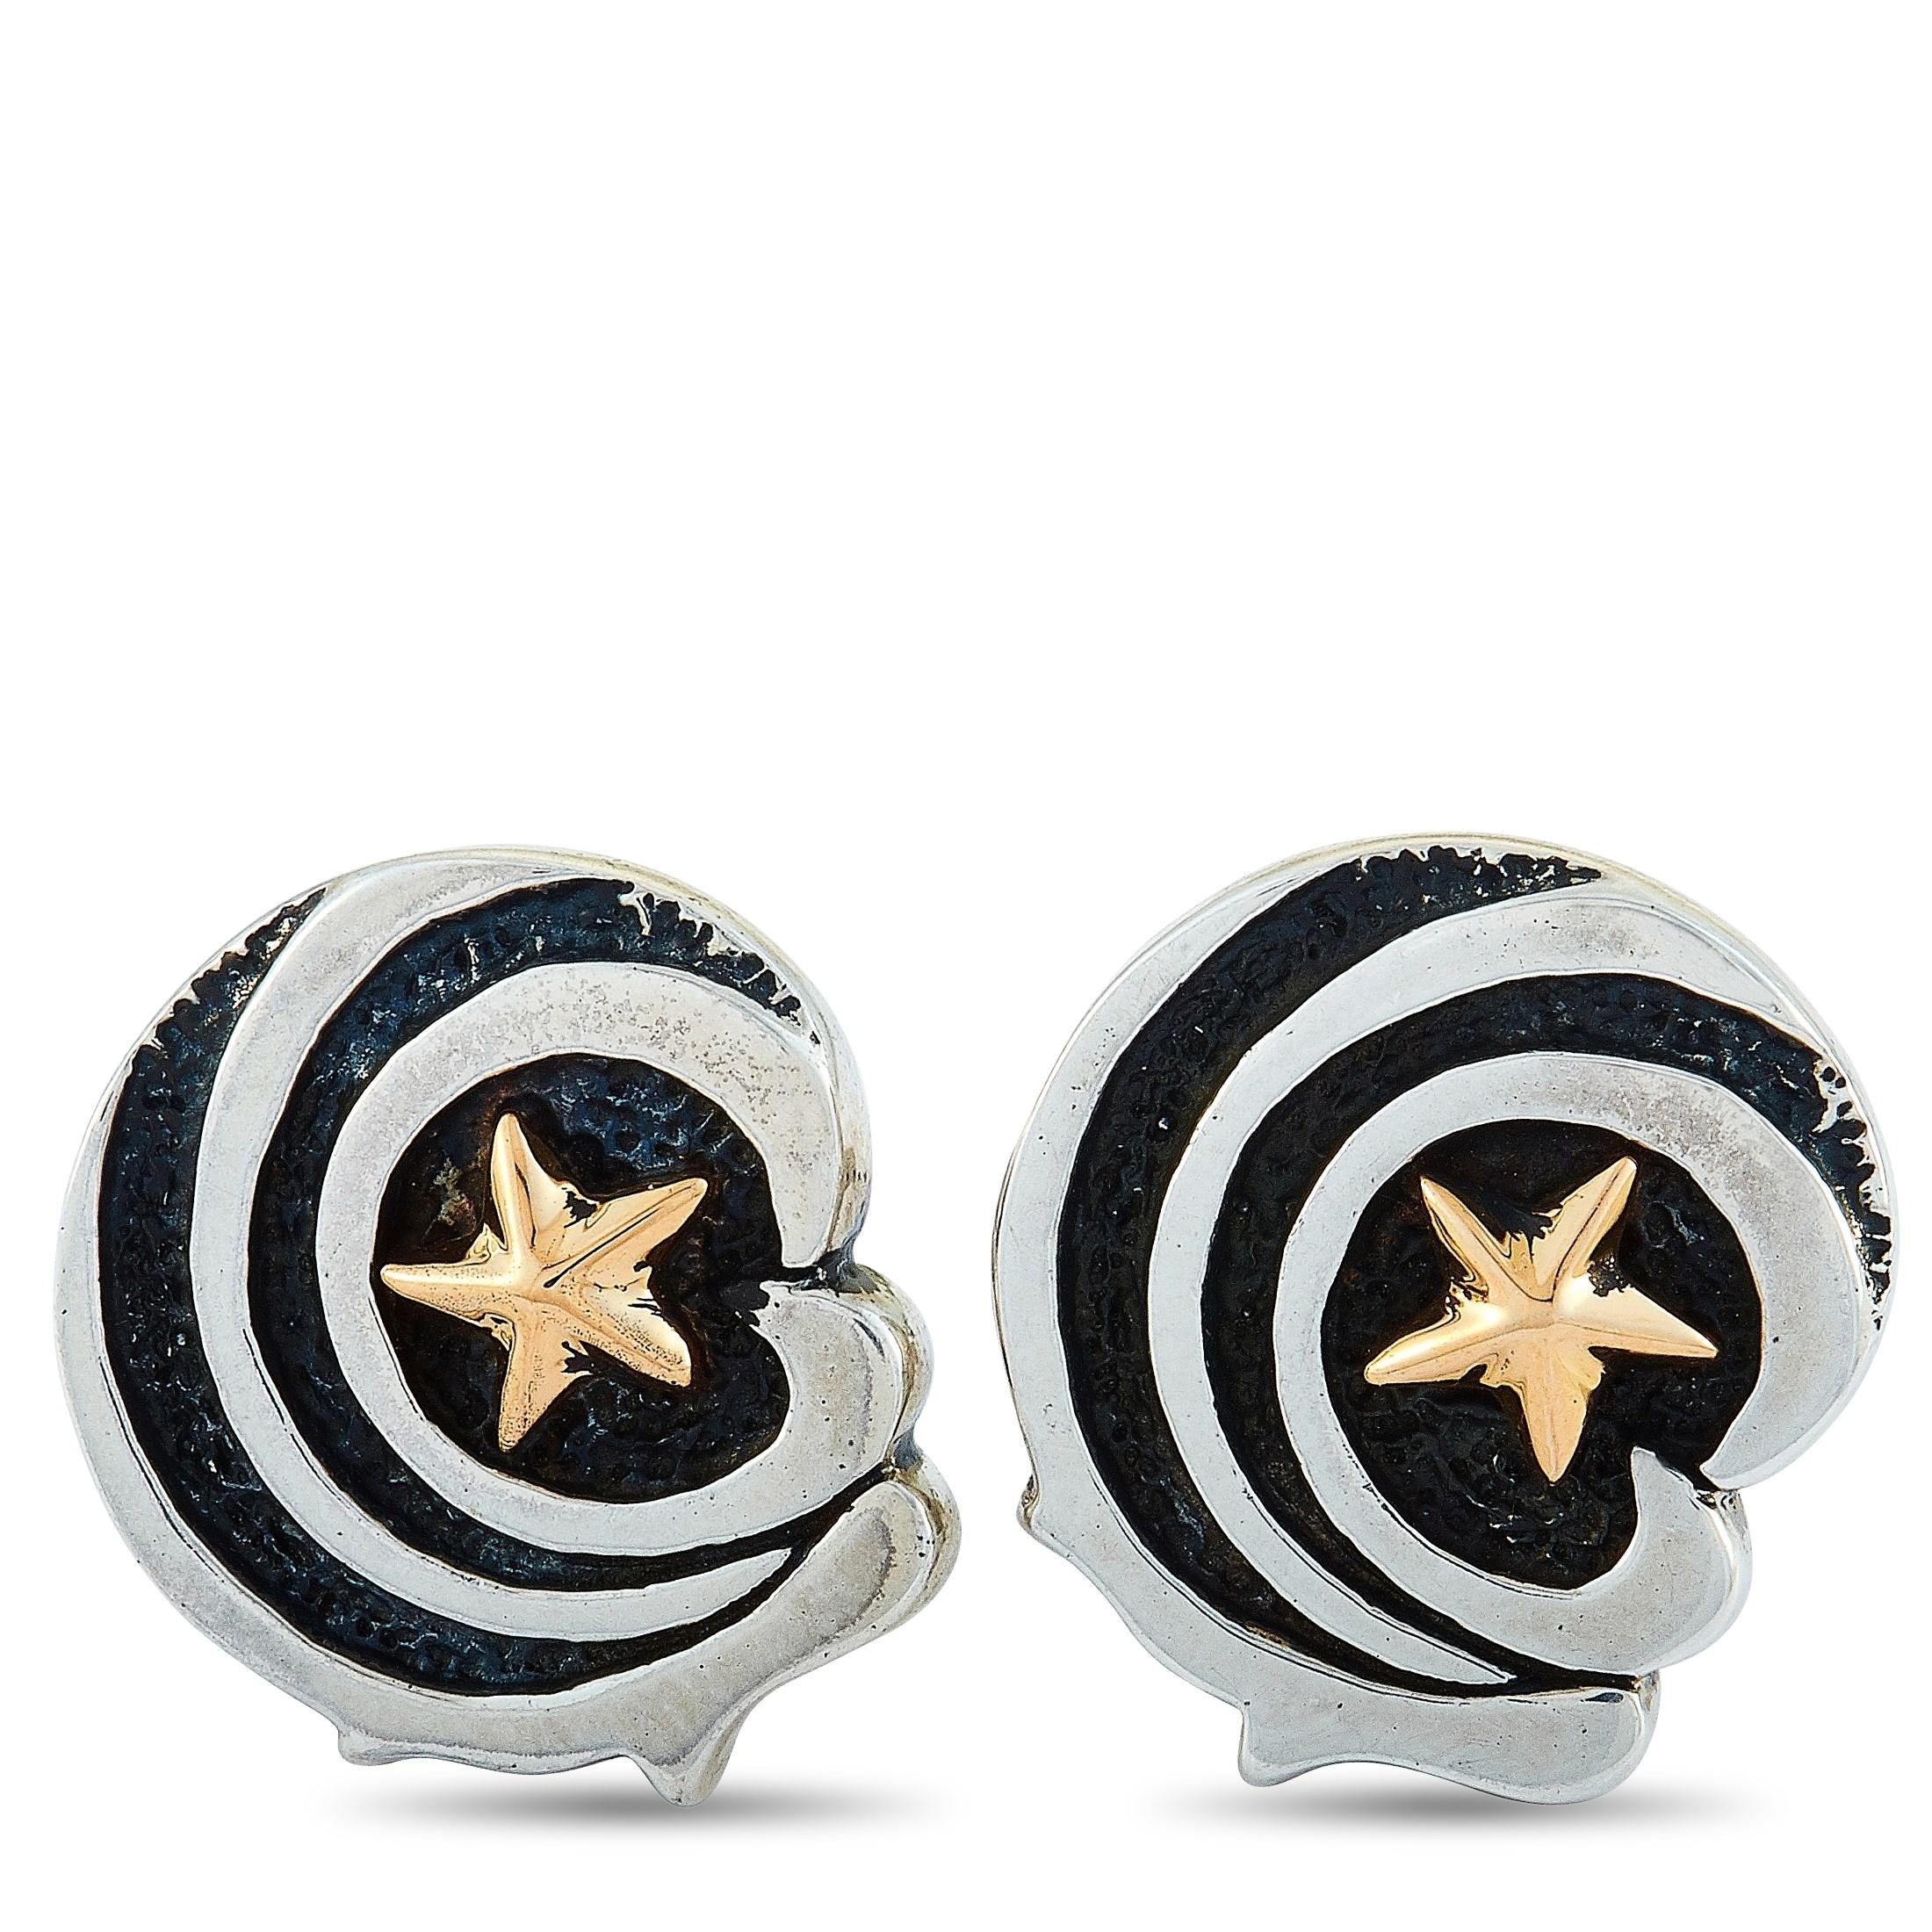 These King Baby cufflinks are made of silver, feature bullet back closure, and each of the two weighs 9.9 grams. The cufflinks measure 0.73” in length and 0.78” in width.

The pair is offered in brand-new condition and includes the manufacturer’s